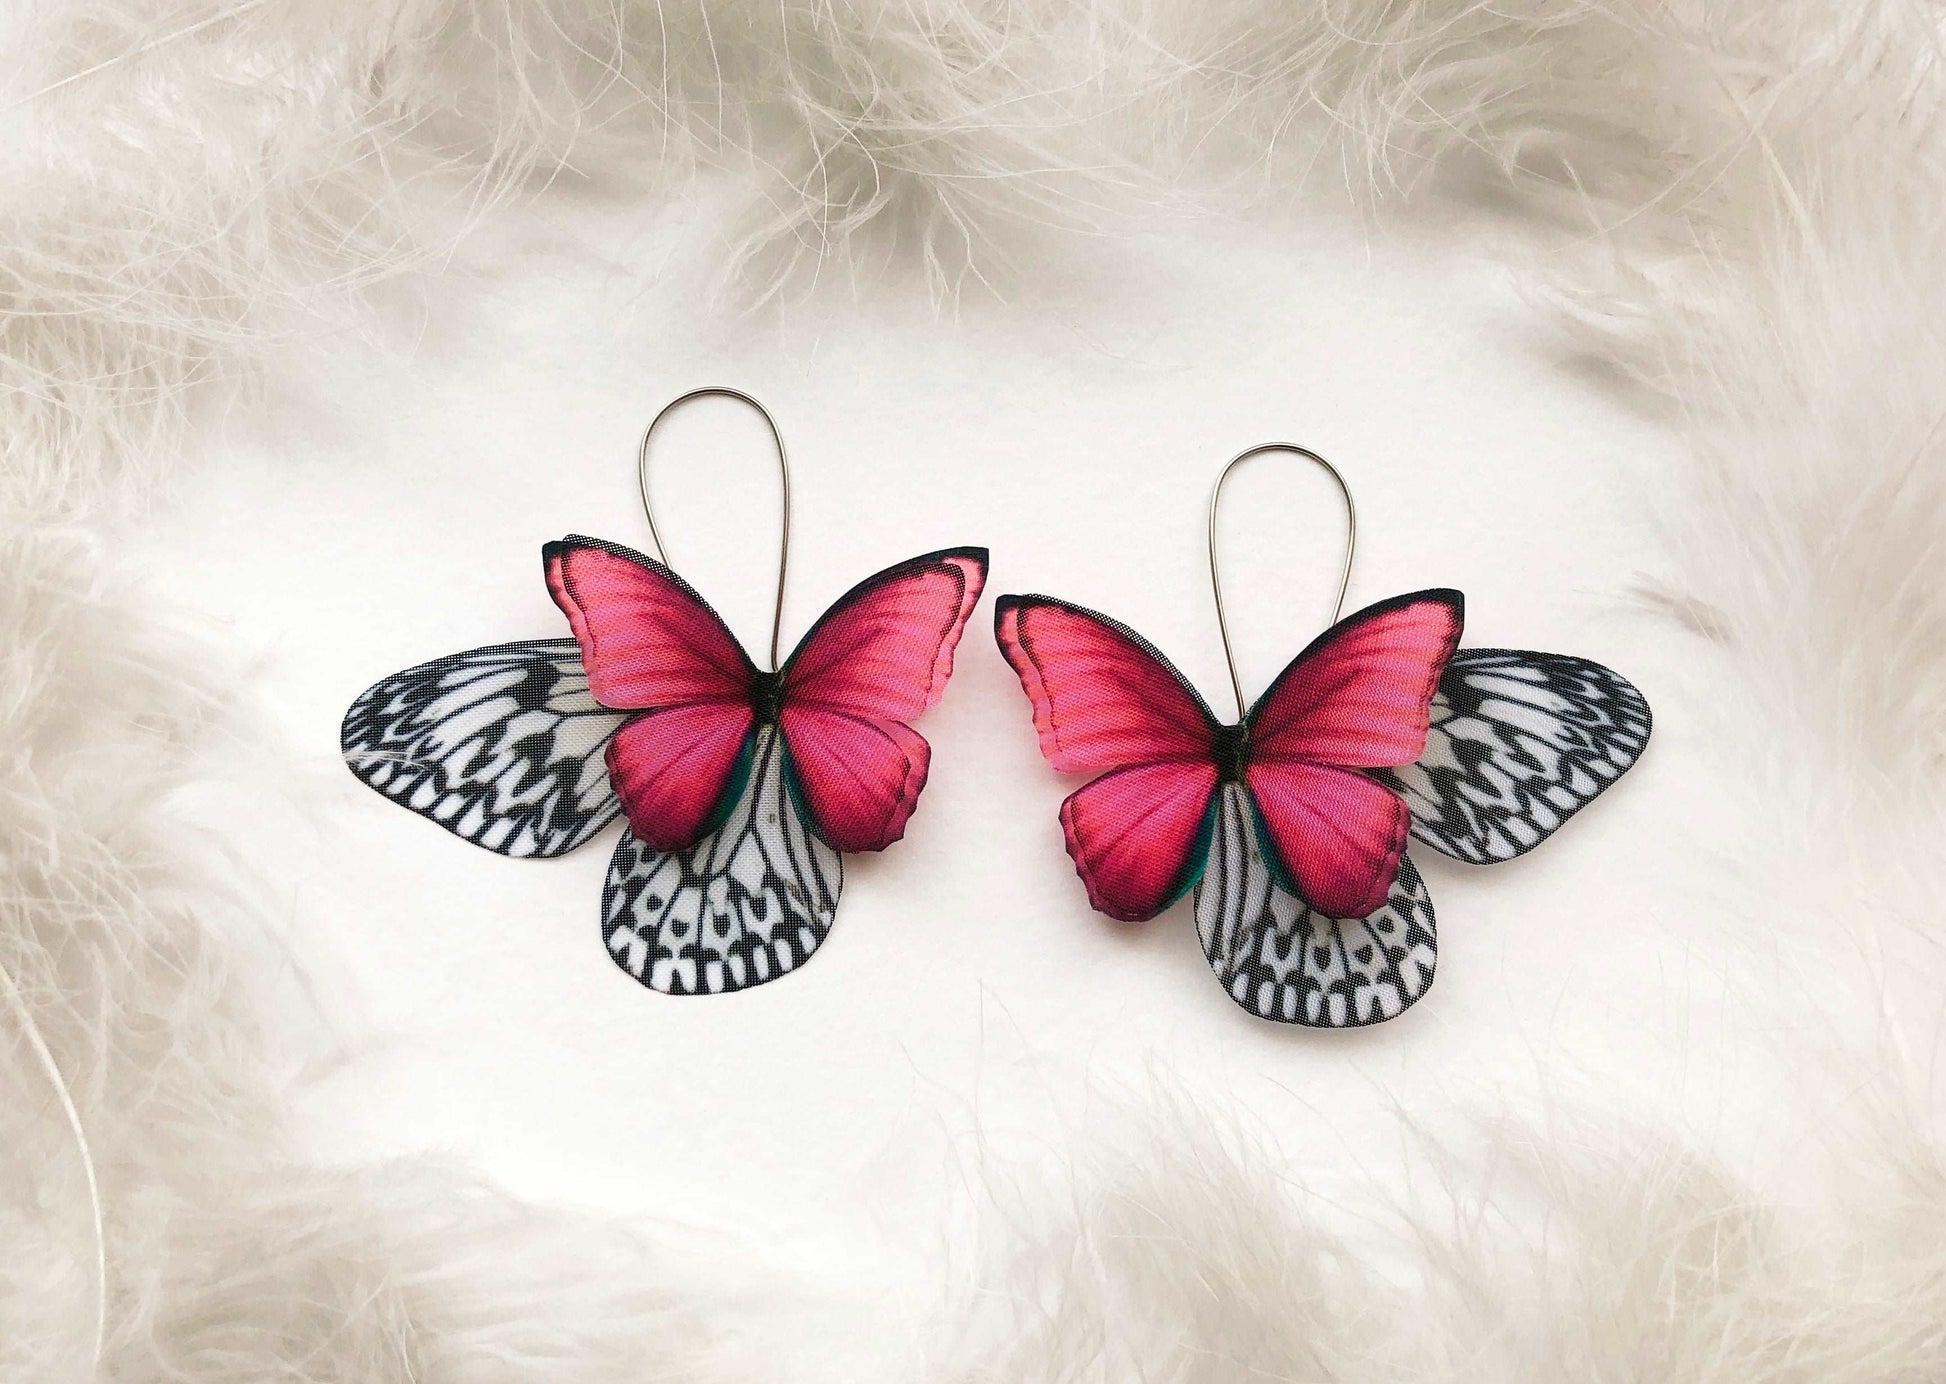 Neon pink moth and butterfly wing earrings